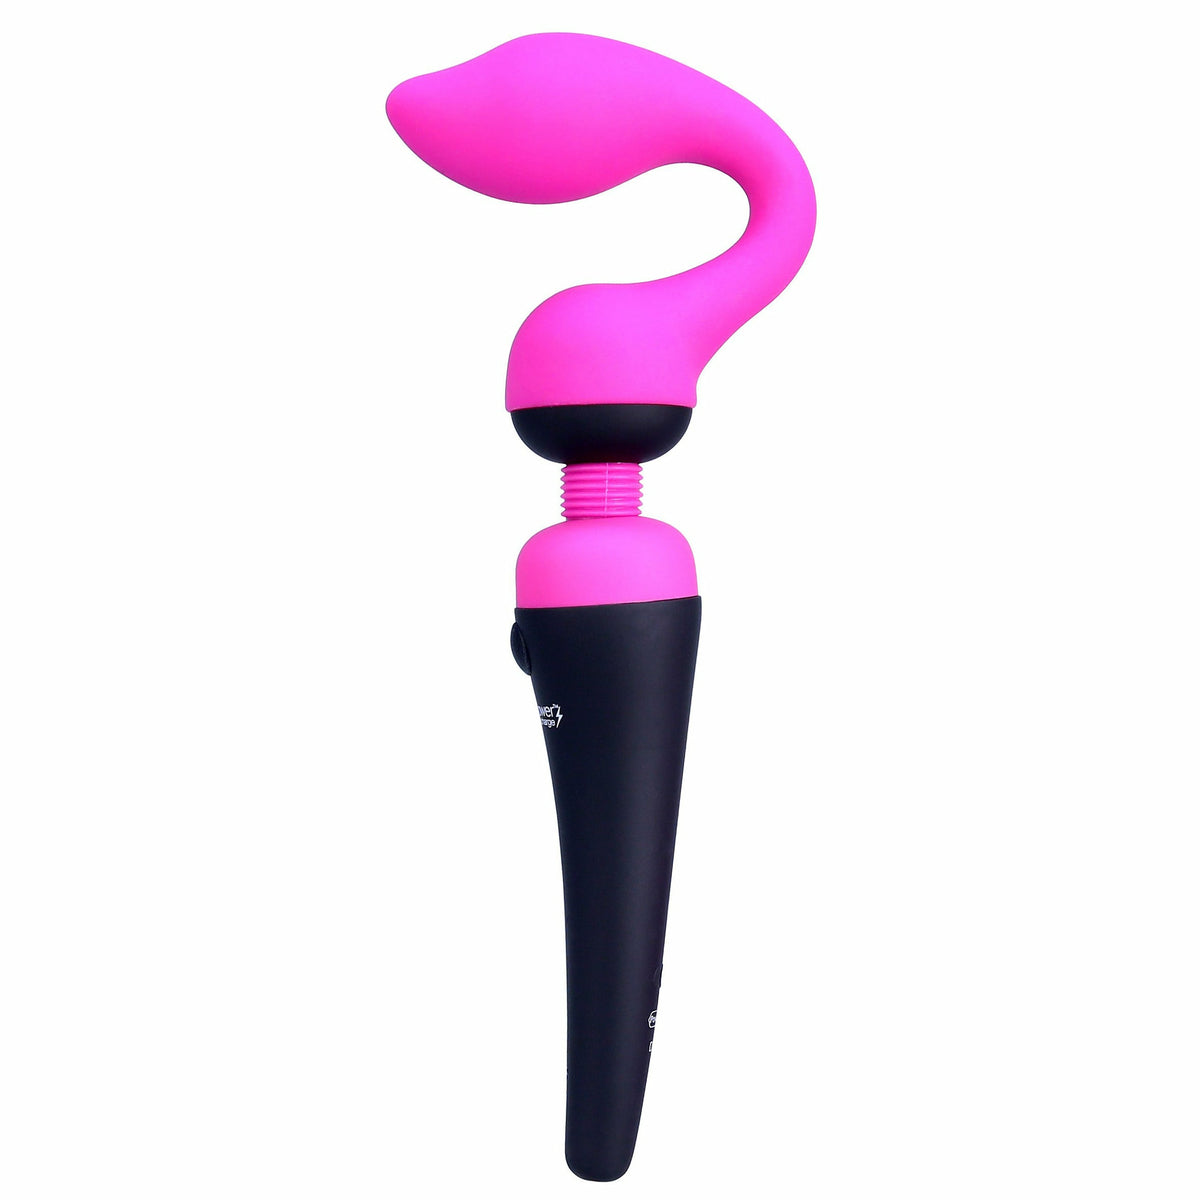 PalmPower PalmSensual Head Attachments (For use with PalmPower)